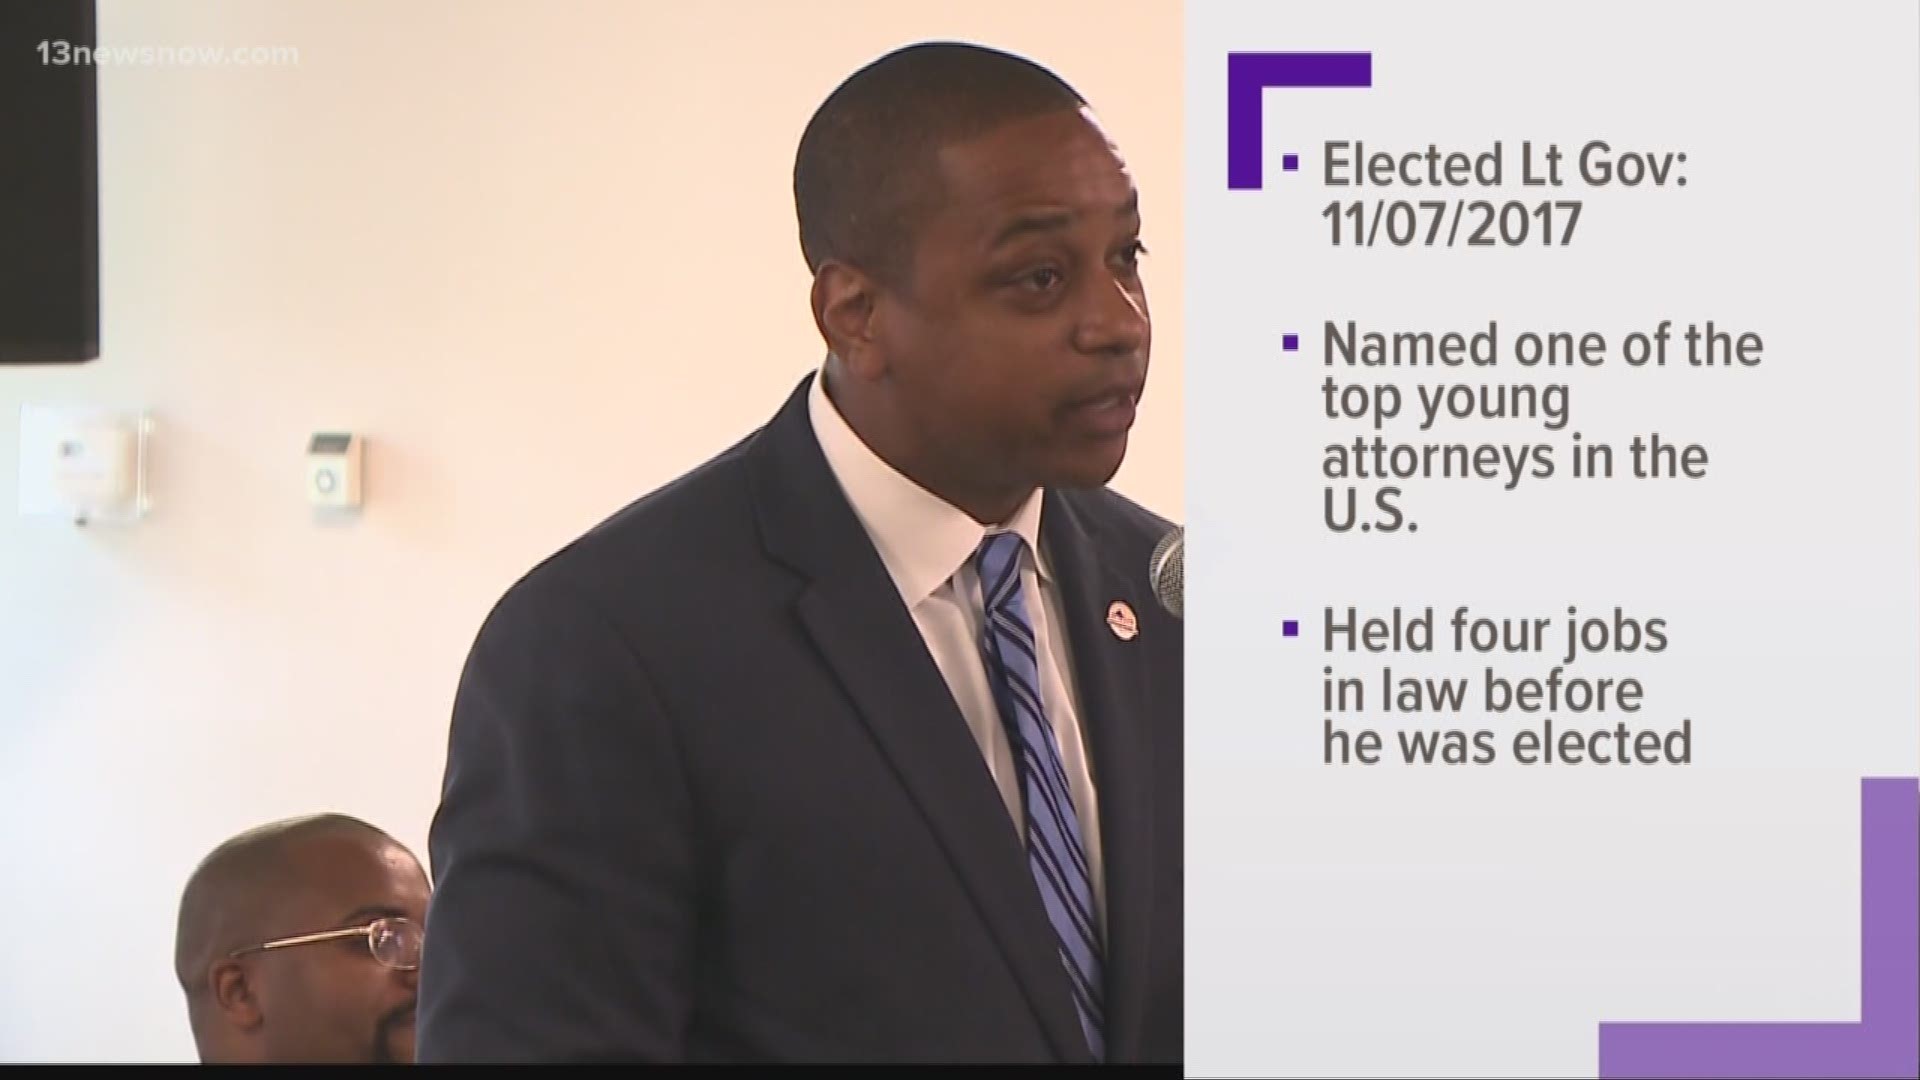 The next in line for governor in Virginia is Lieutenant Governor Justin Fairfax.